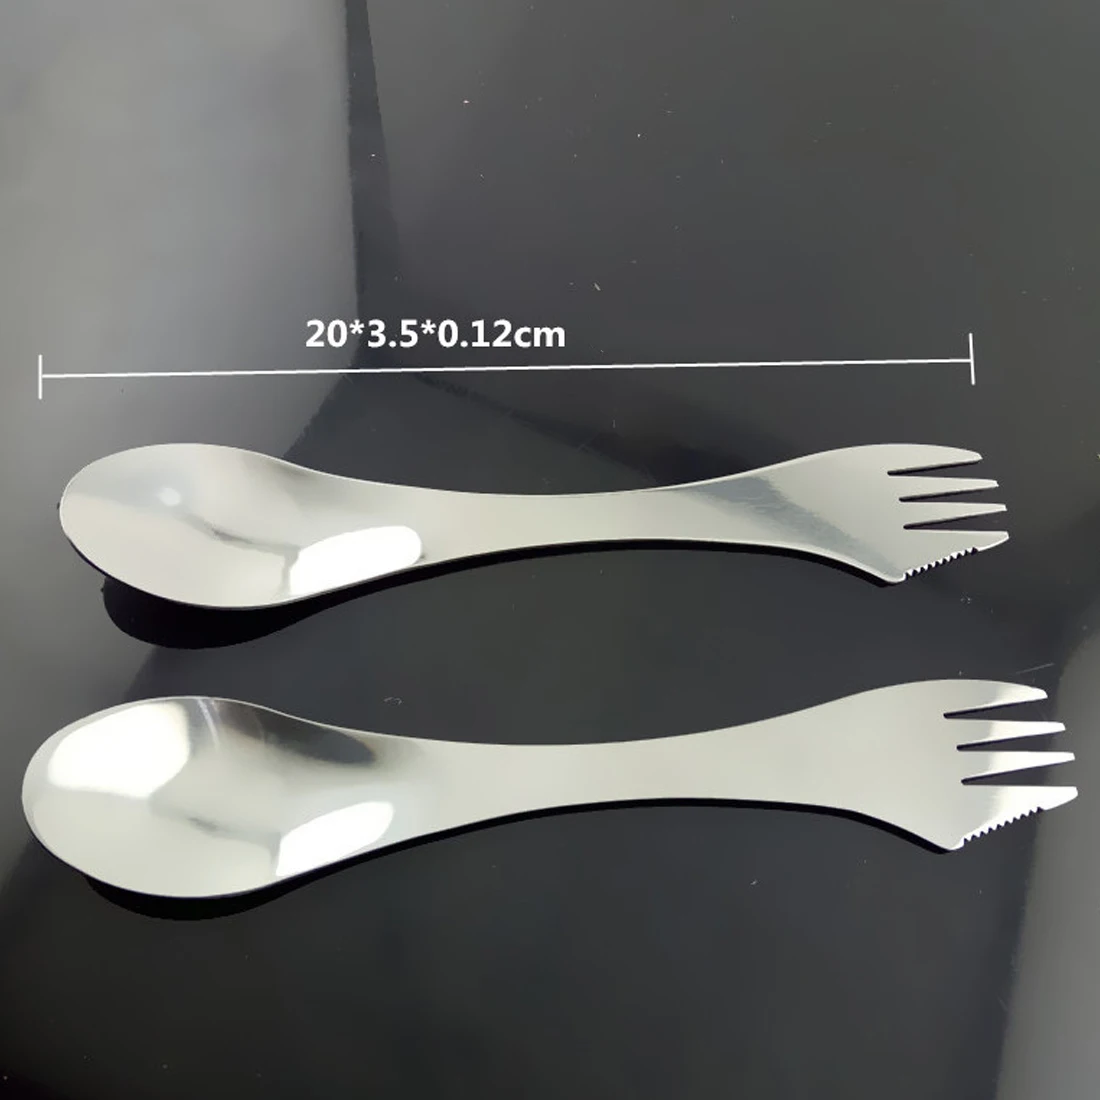 

Stainless Gadget Spork Spoon Fork Cutlery Utensil 3 in 1 Combo for Picnic Breakfast Lunch Outdoor Travel Camping